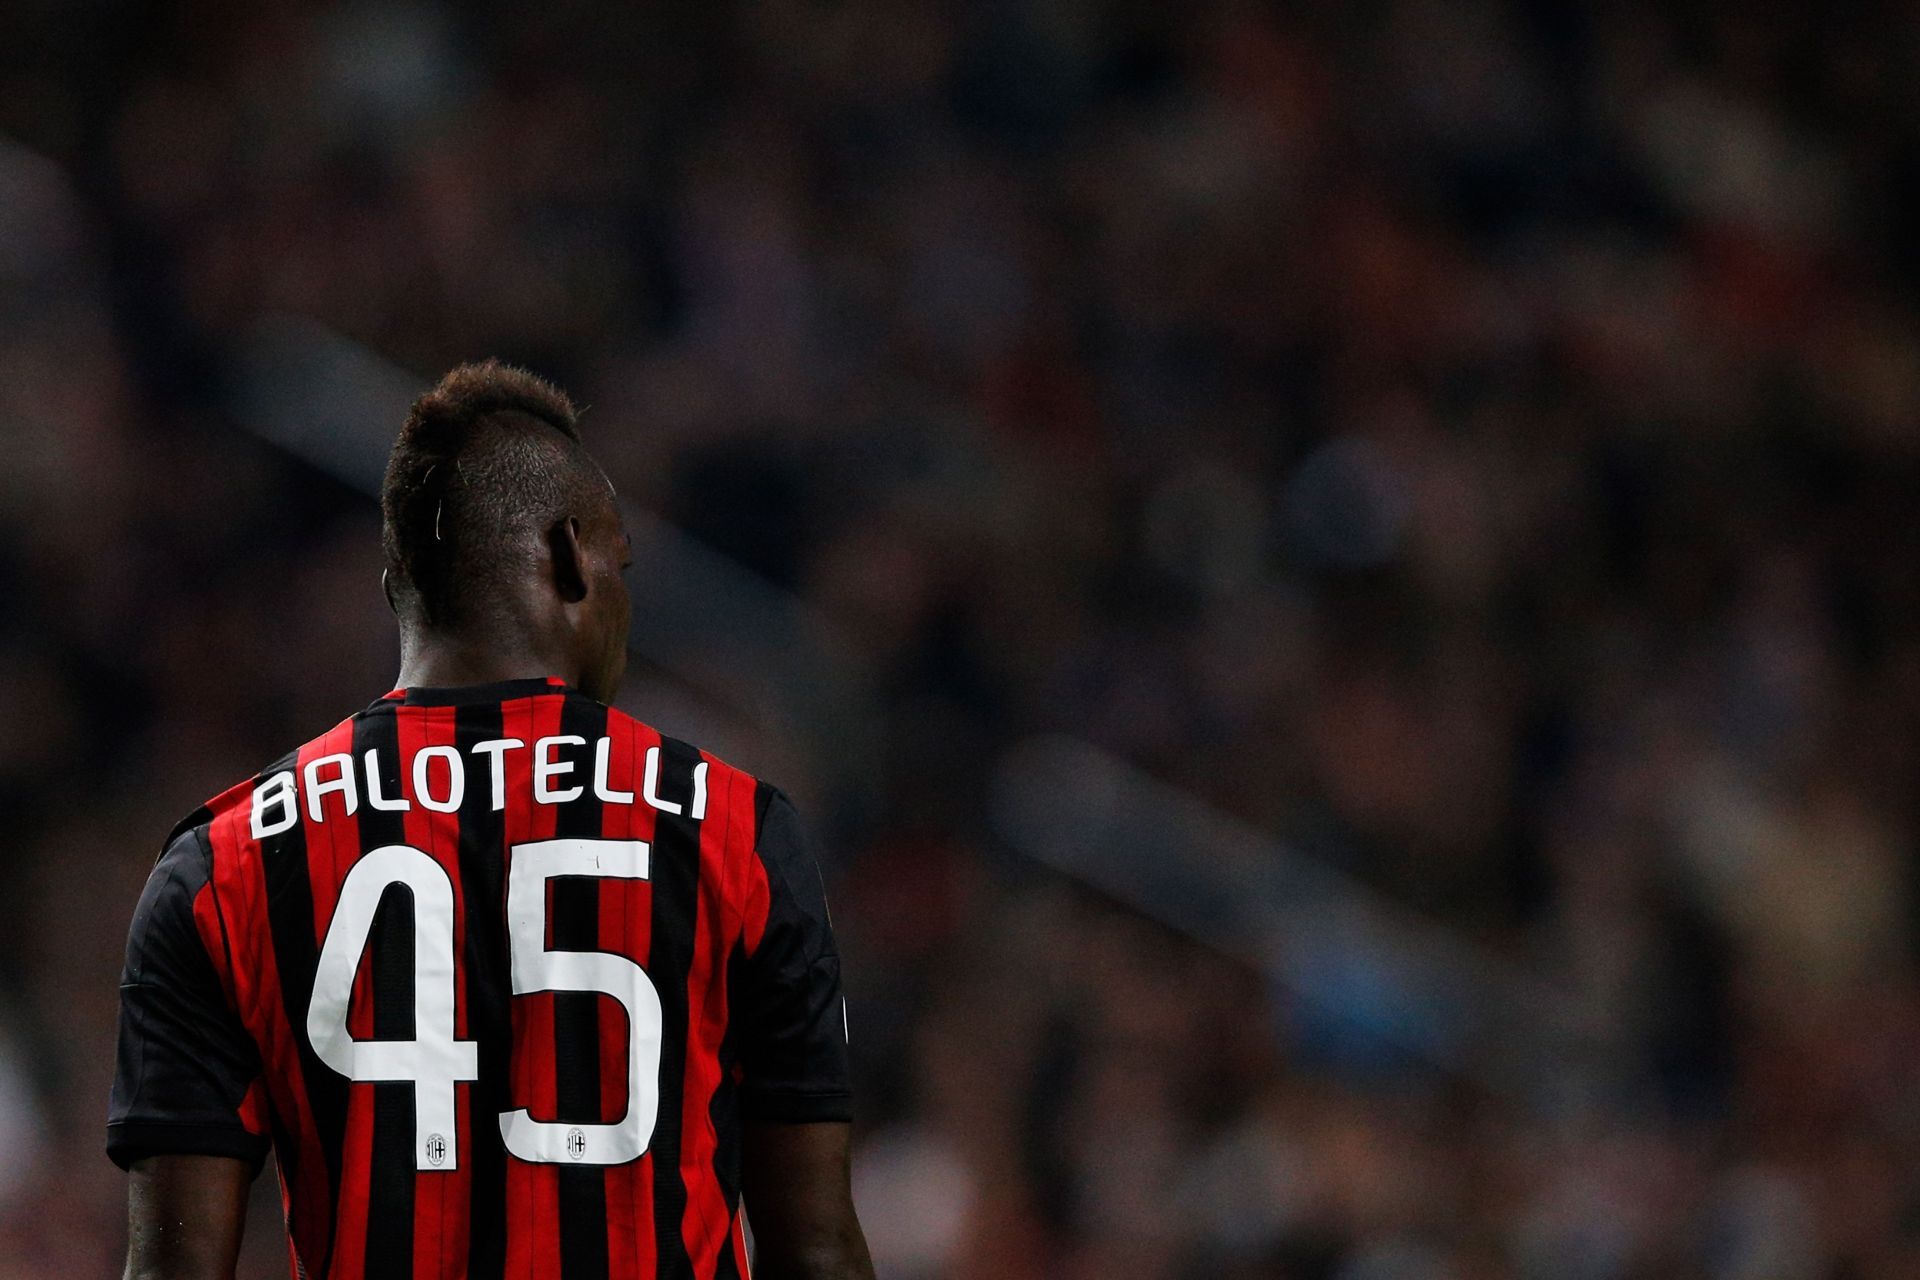 Mario Balotelli in action for AC Milan in 2013